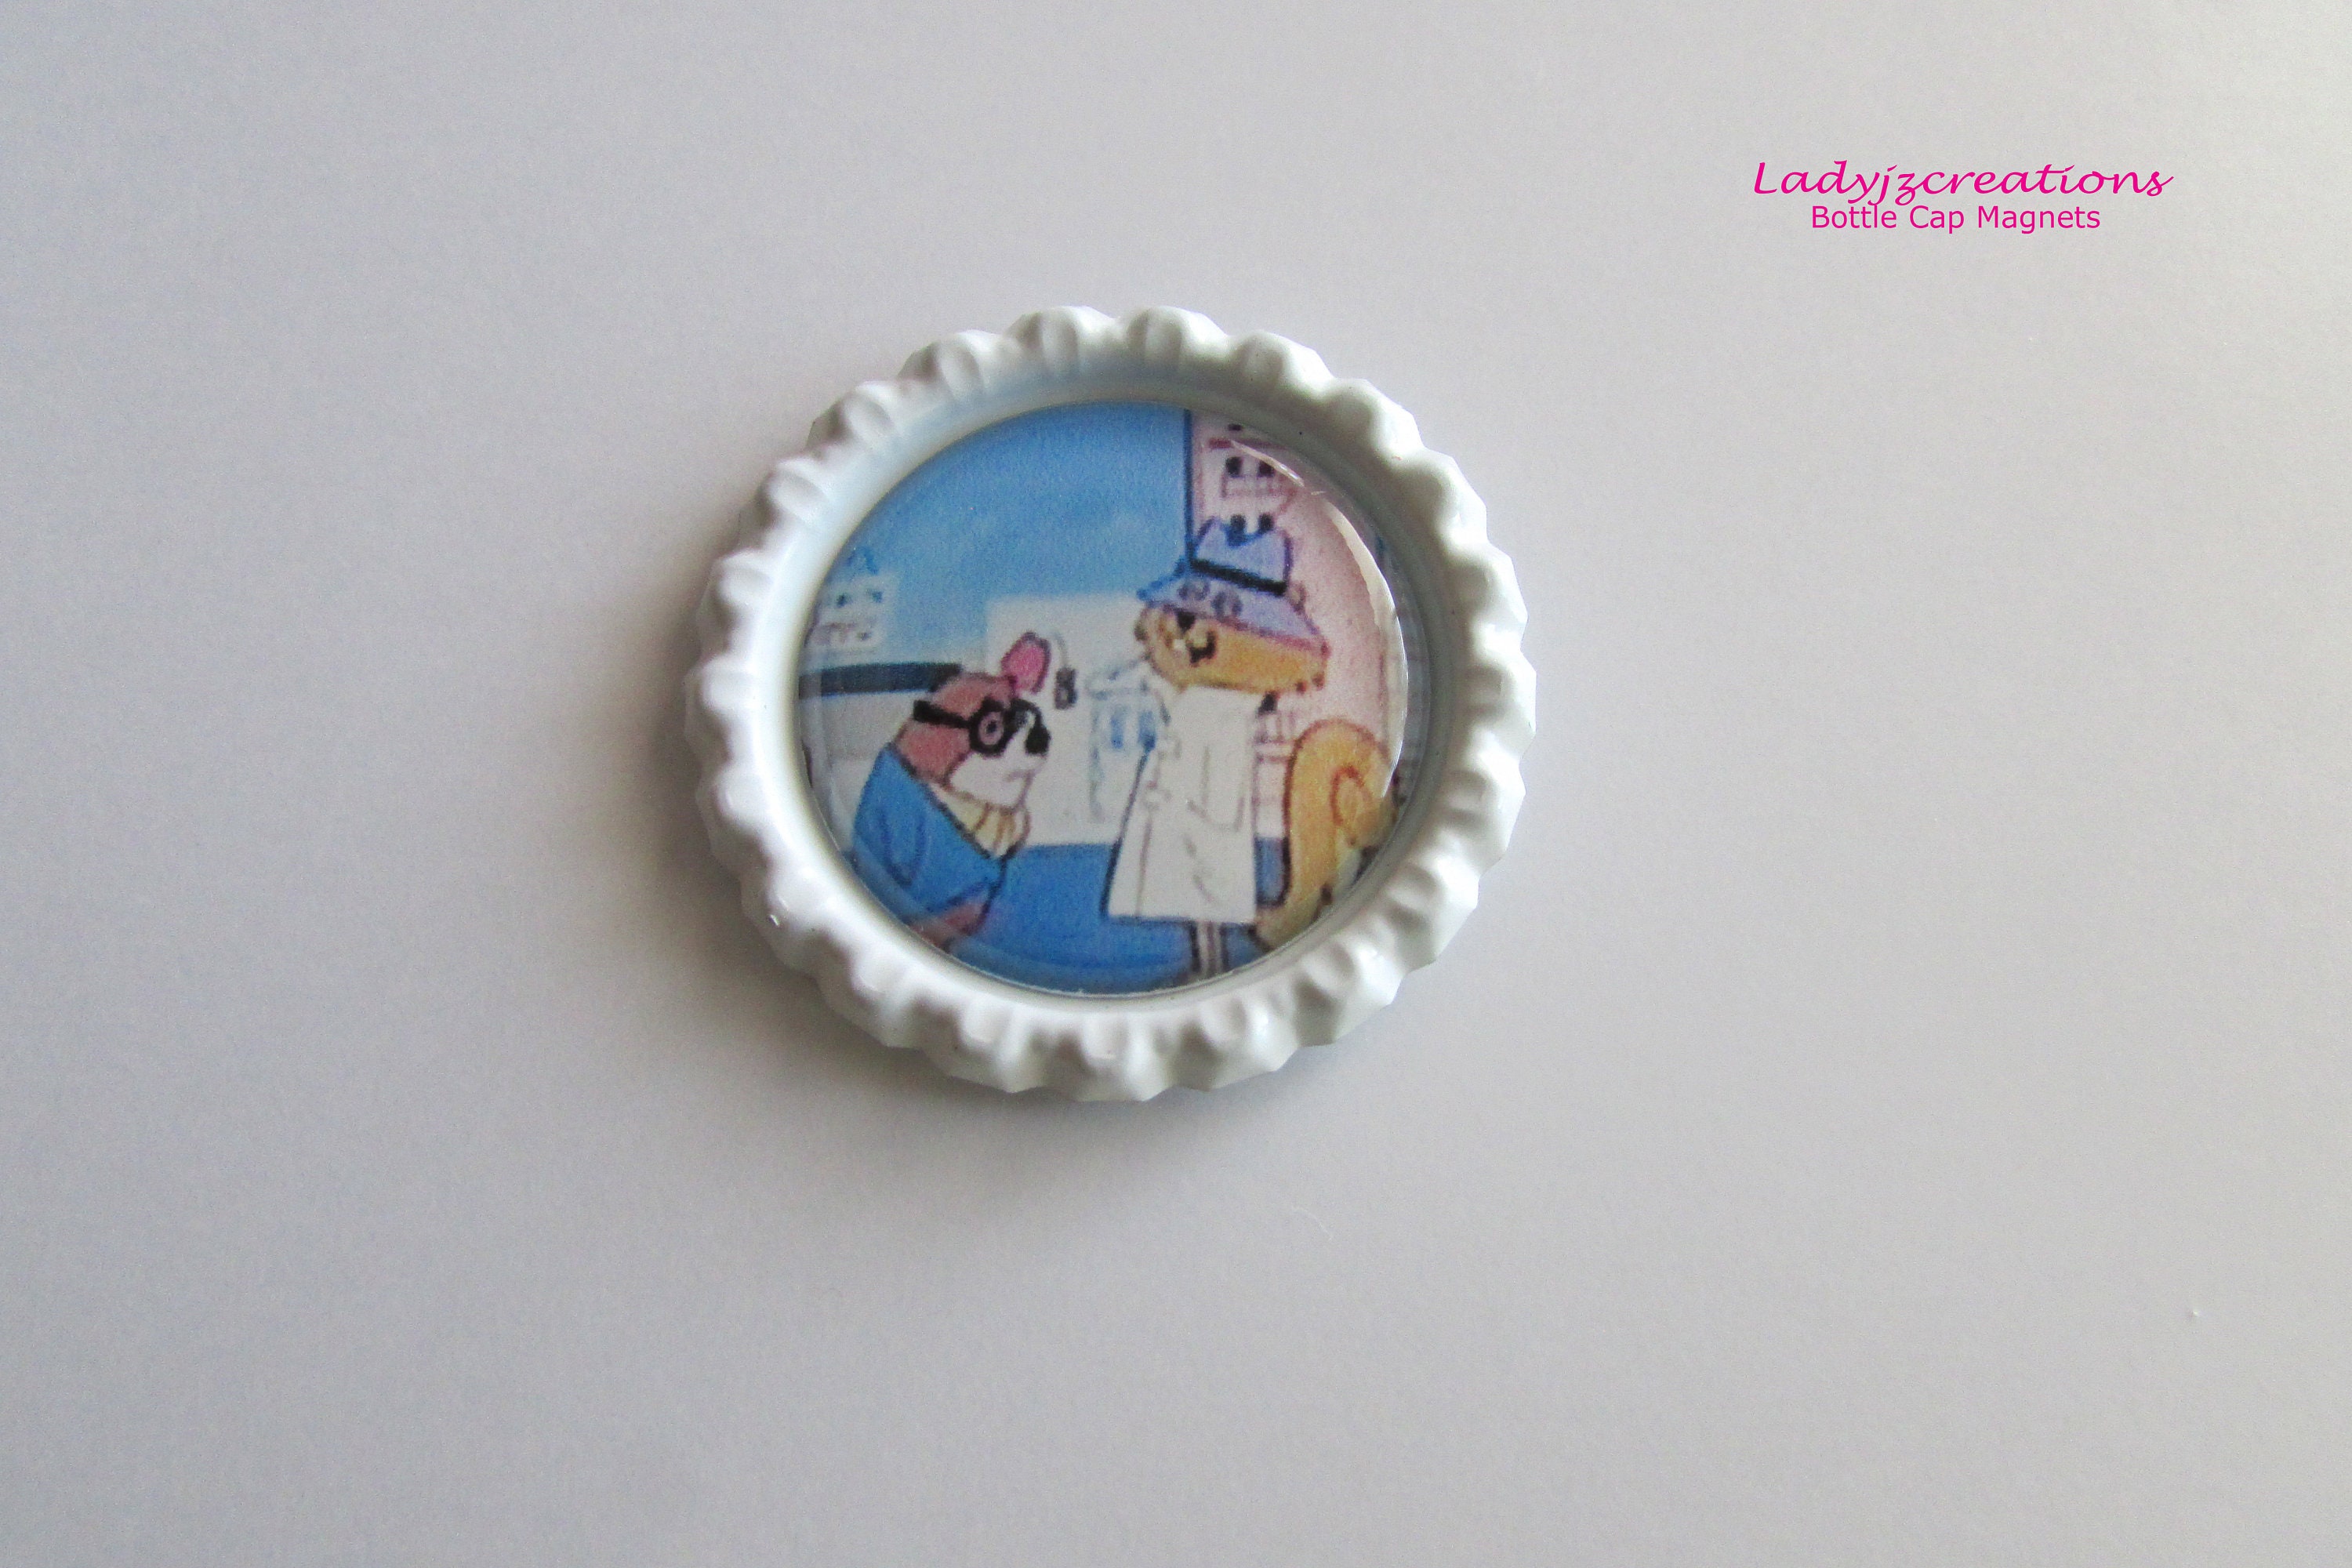 Condo Blues: 5 Quick and Easy Bottle Cap Refrigerator Magnet Craft